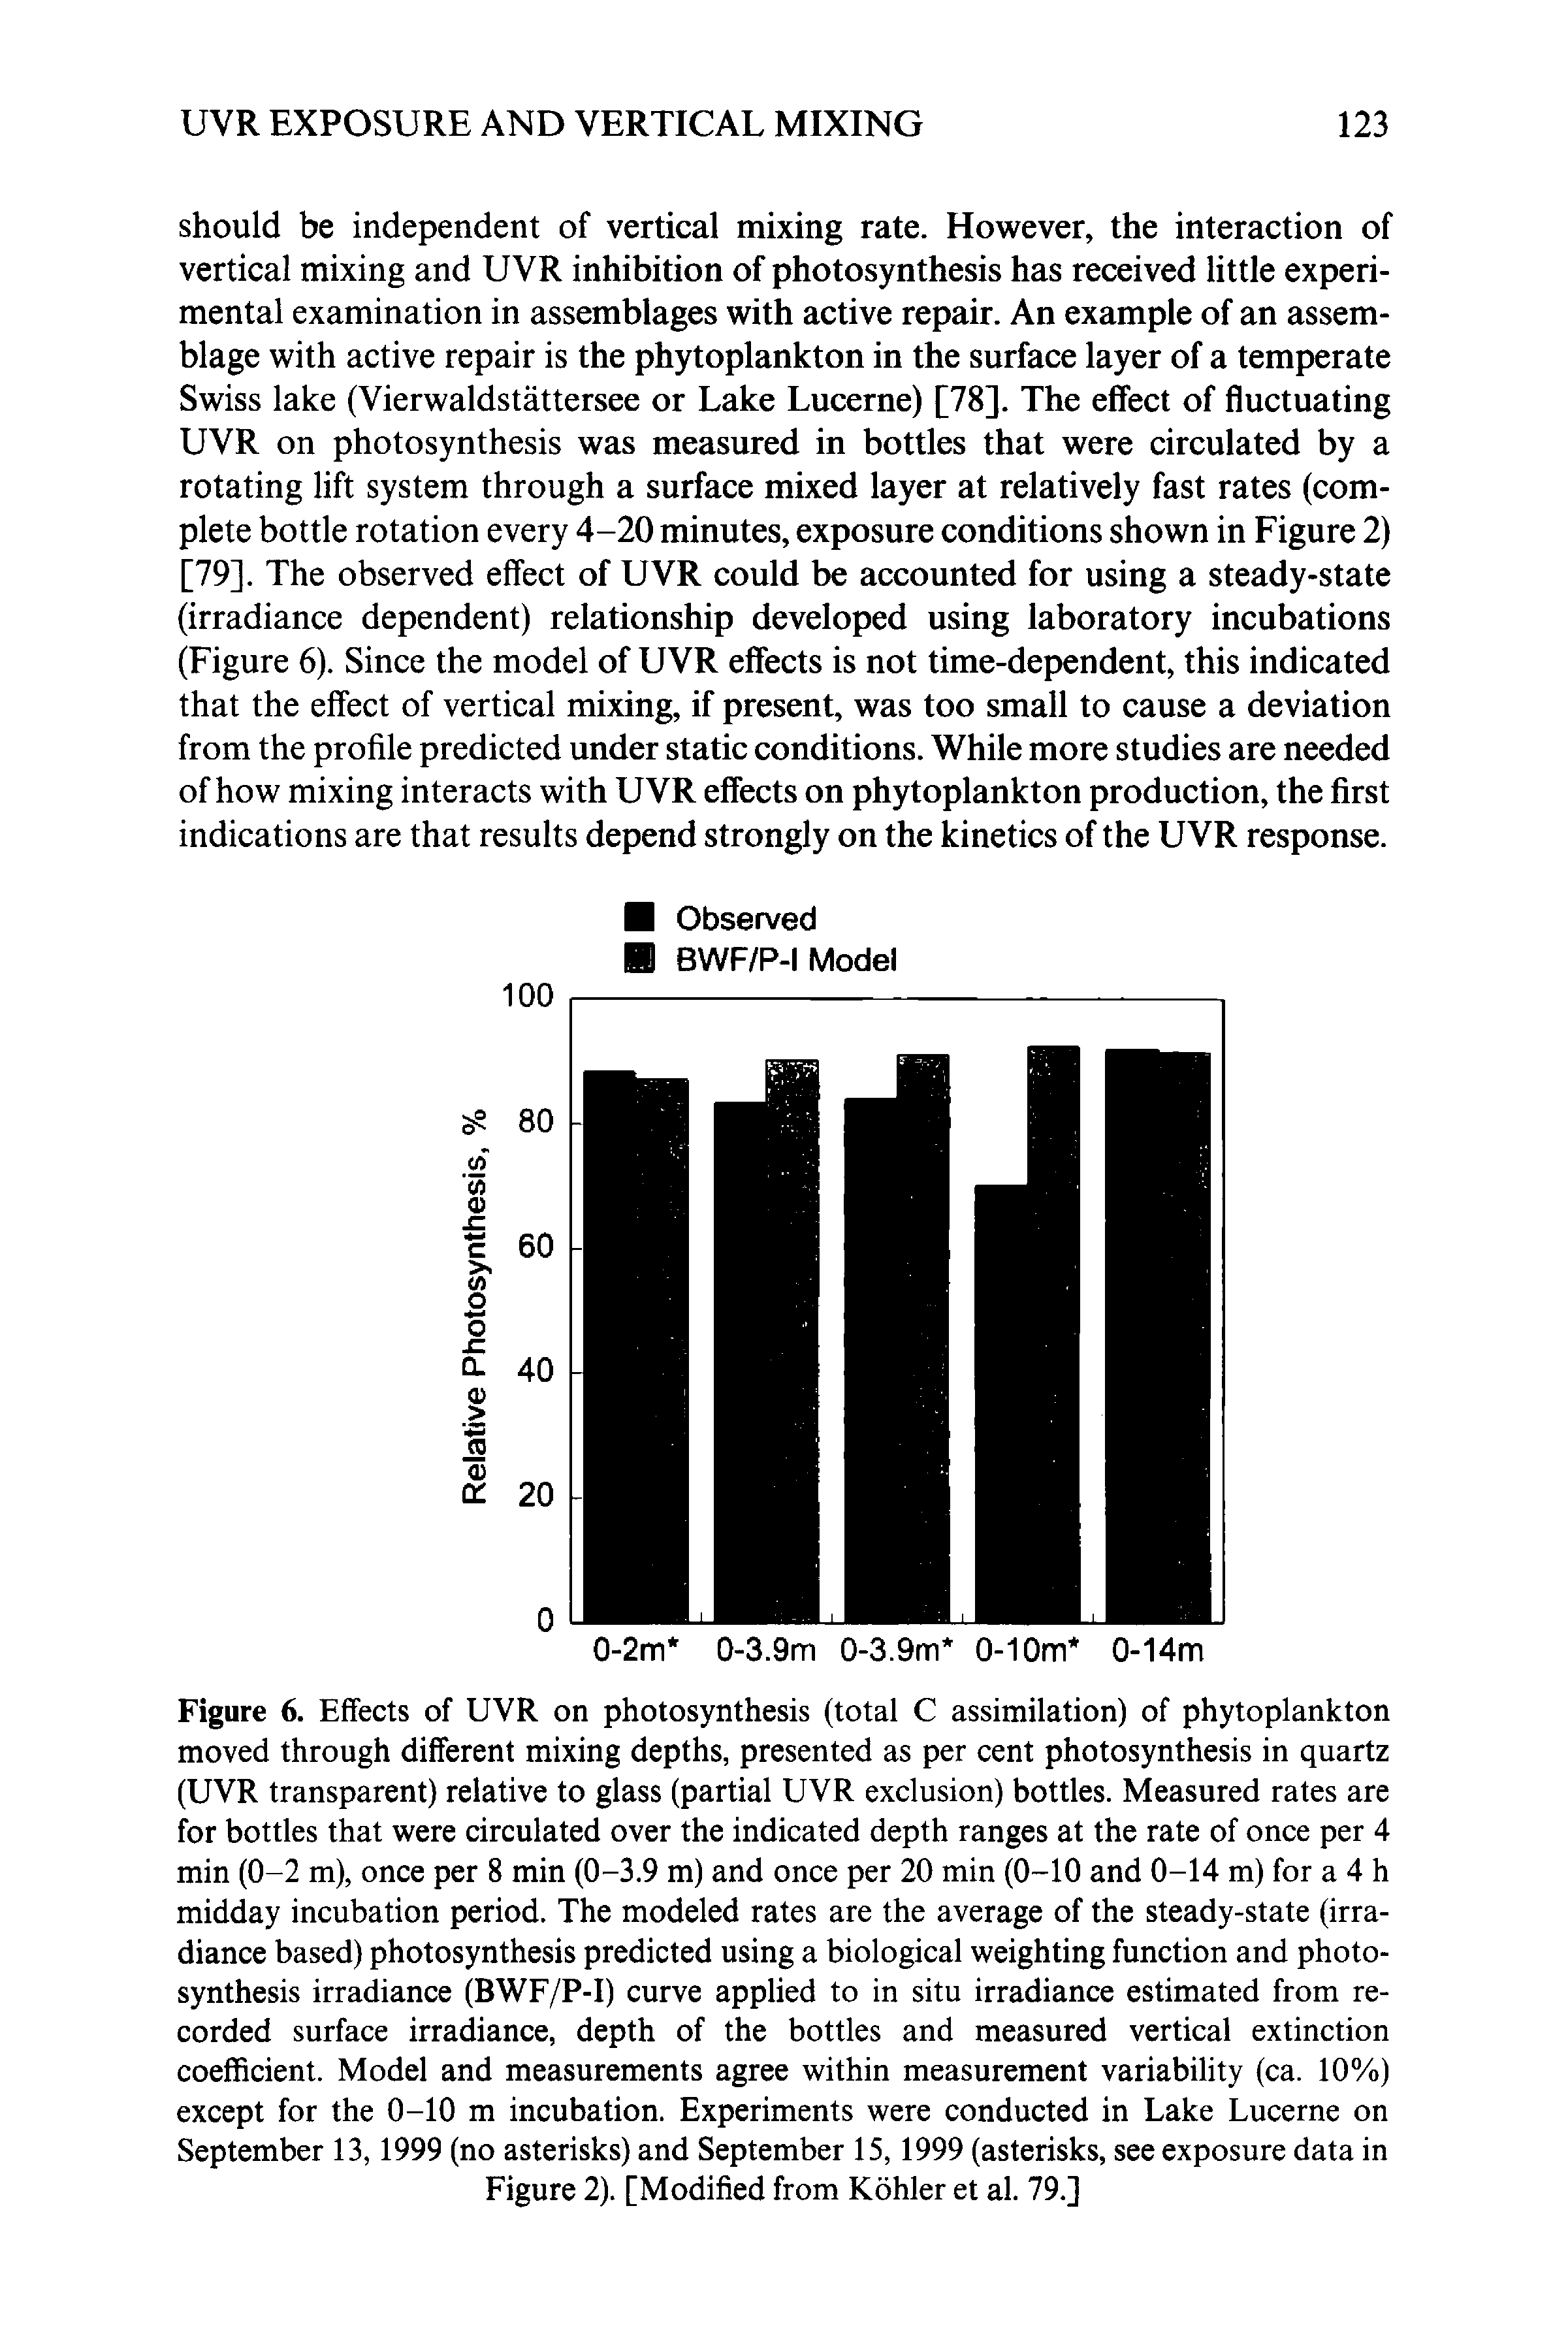 Figure 6. Effects of UVR on photosynthesis (total C assimilation) of phytoplankton moved through different mixing depths, presented as per cent photosynthesis in quartz (UVR transparent) relative to glass (partial UVR exclusion) bottles. Measured rates are for bottles that were circulated over the indicated depth ranges at the rate of once per 4 min (0-2 m), once per 8 min (0-3.9 m) and once per 20 min (0-10 and 0-14 m) for a 4 h midday incubation period. The modeled rates are the average of the steady-state (irradiance based) photosynthesis predicted using a biological weighting function and photosynthesis irradiance (BWF/P-I) curve applied to in situ irradiance estimated from recorded surface irradiance, depth of the bottles and measured vertical extinction coefficient. Model and measurements agree within measurement variability (ca. 10%) except for the 0-10 m incubation. Experiments were conducted in Lake Lucerne on September 13,1999 (no asterisks) and September 15,1999 (asterisks, see exposure data in Figure 2). [Modified from Kohler et al. 79.]...